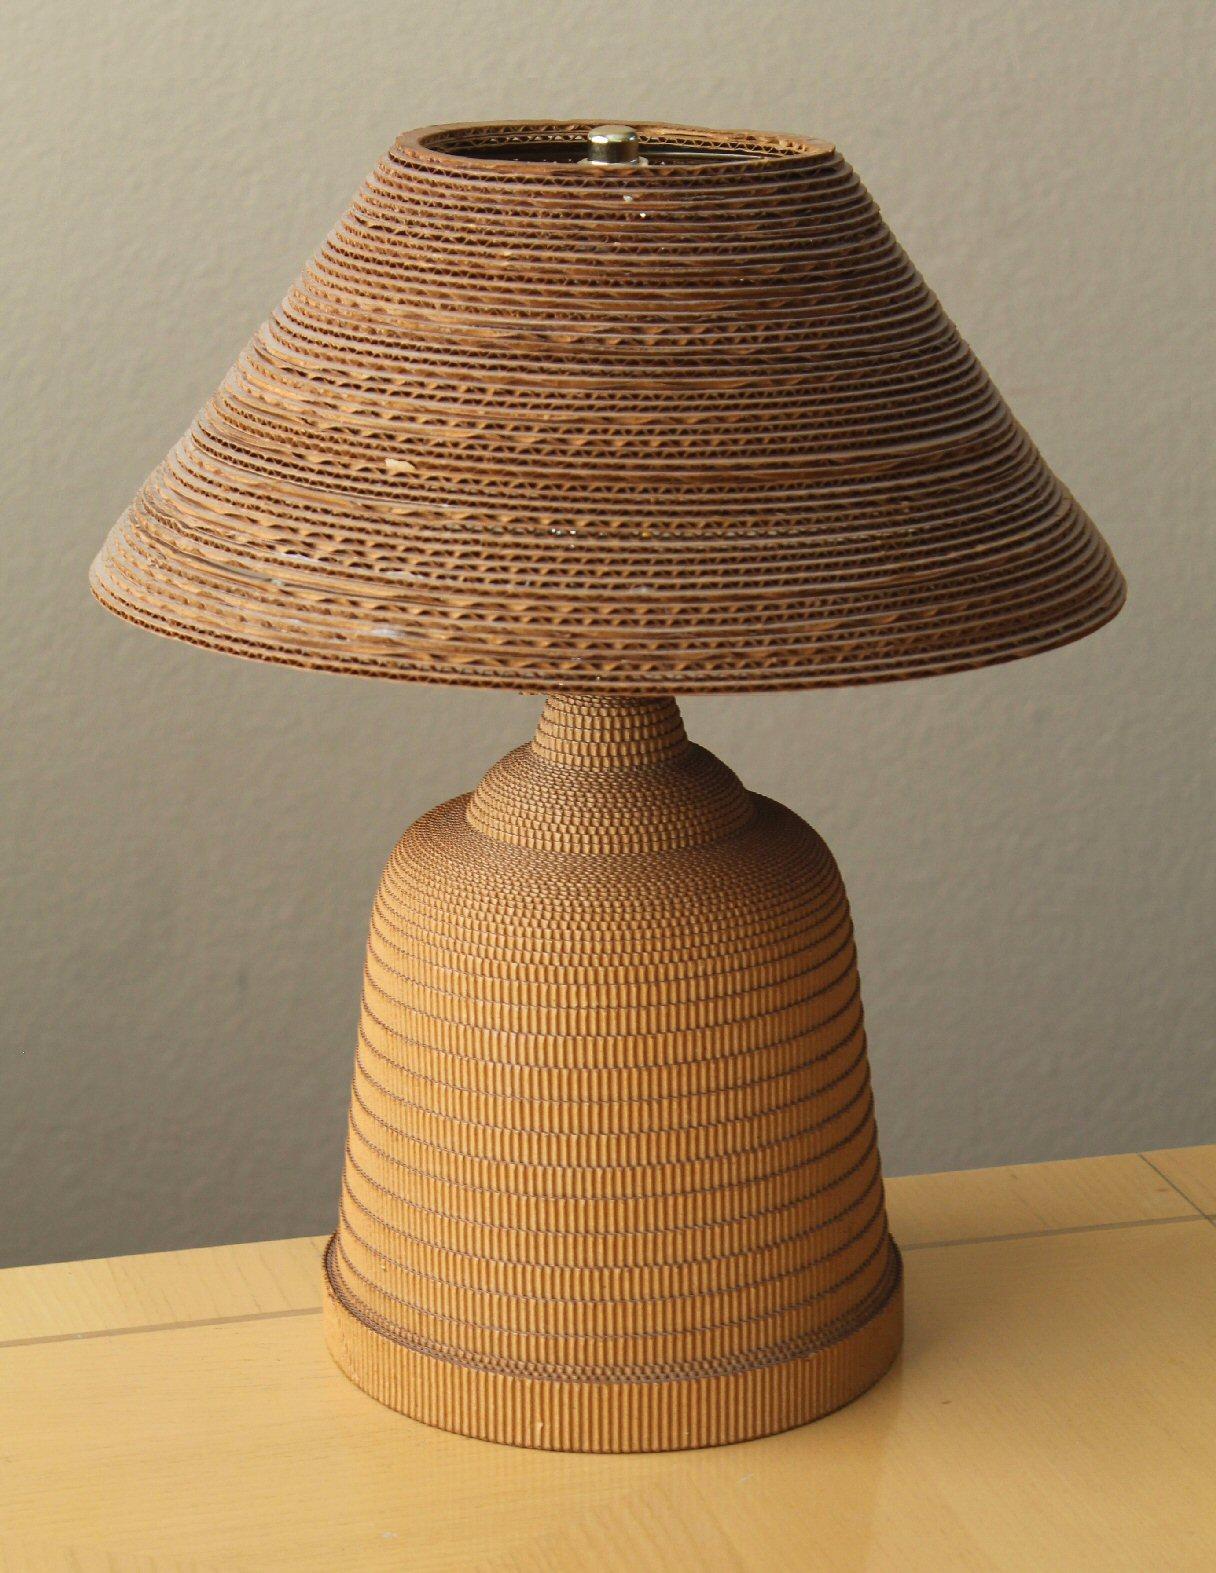 Wow!


Rarest Mid Century
Cardboard Table Lamp
By Gregory Van Pelt

Here is a fantastic and simply beautiful example of the card board lamp by Gregory Van Pelt!  The base of this lamp is shaped almost like an ancient Sumerian temple! A feast for the